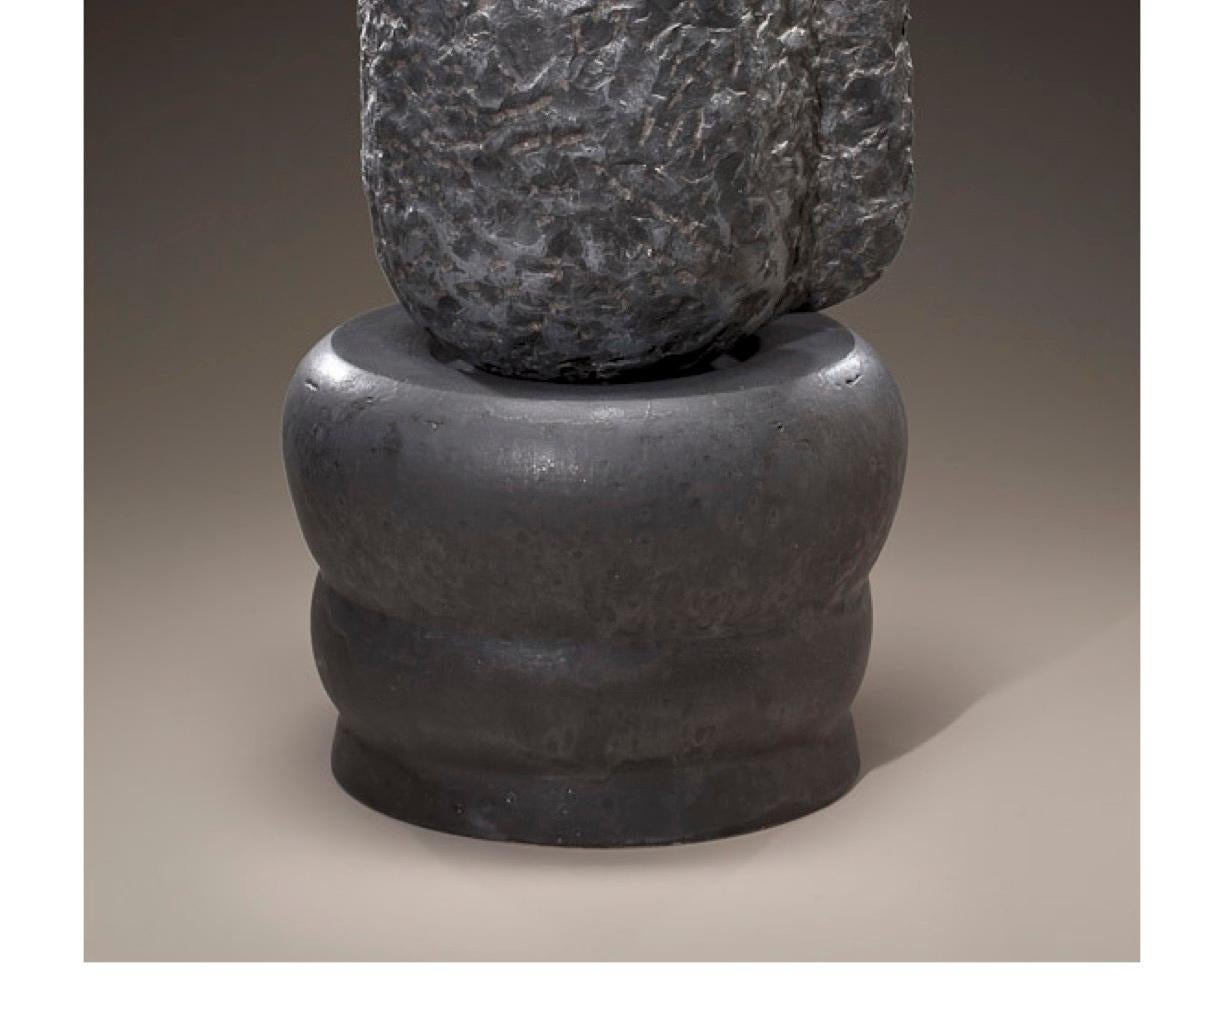 Richard Hirsch Black Marble Mortar and Glass Pestle Sculpture, 2006 - 2010 In Excellent Condition For Sale In New York, NY